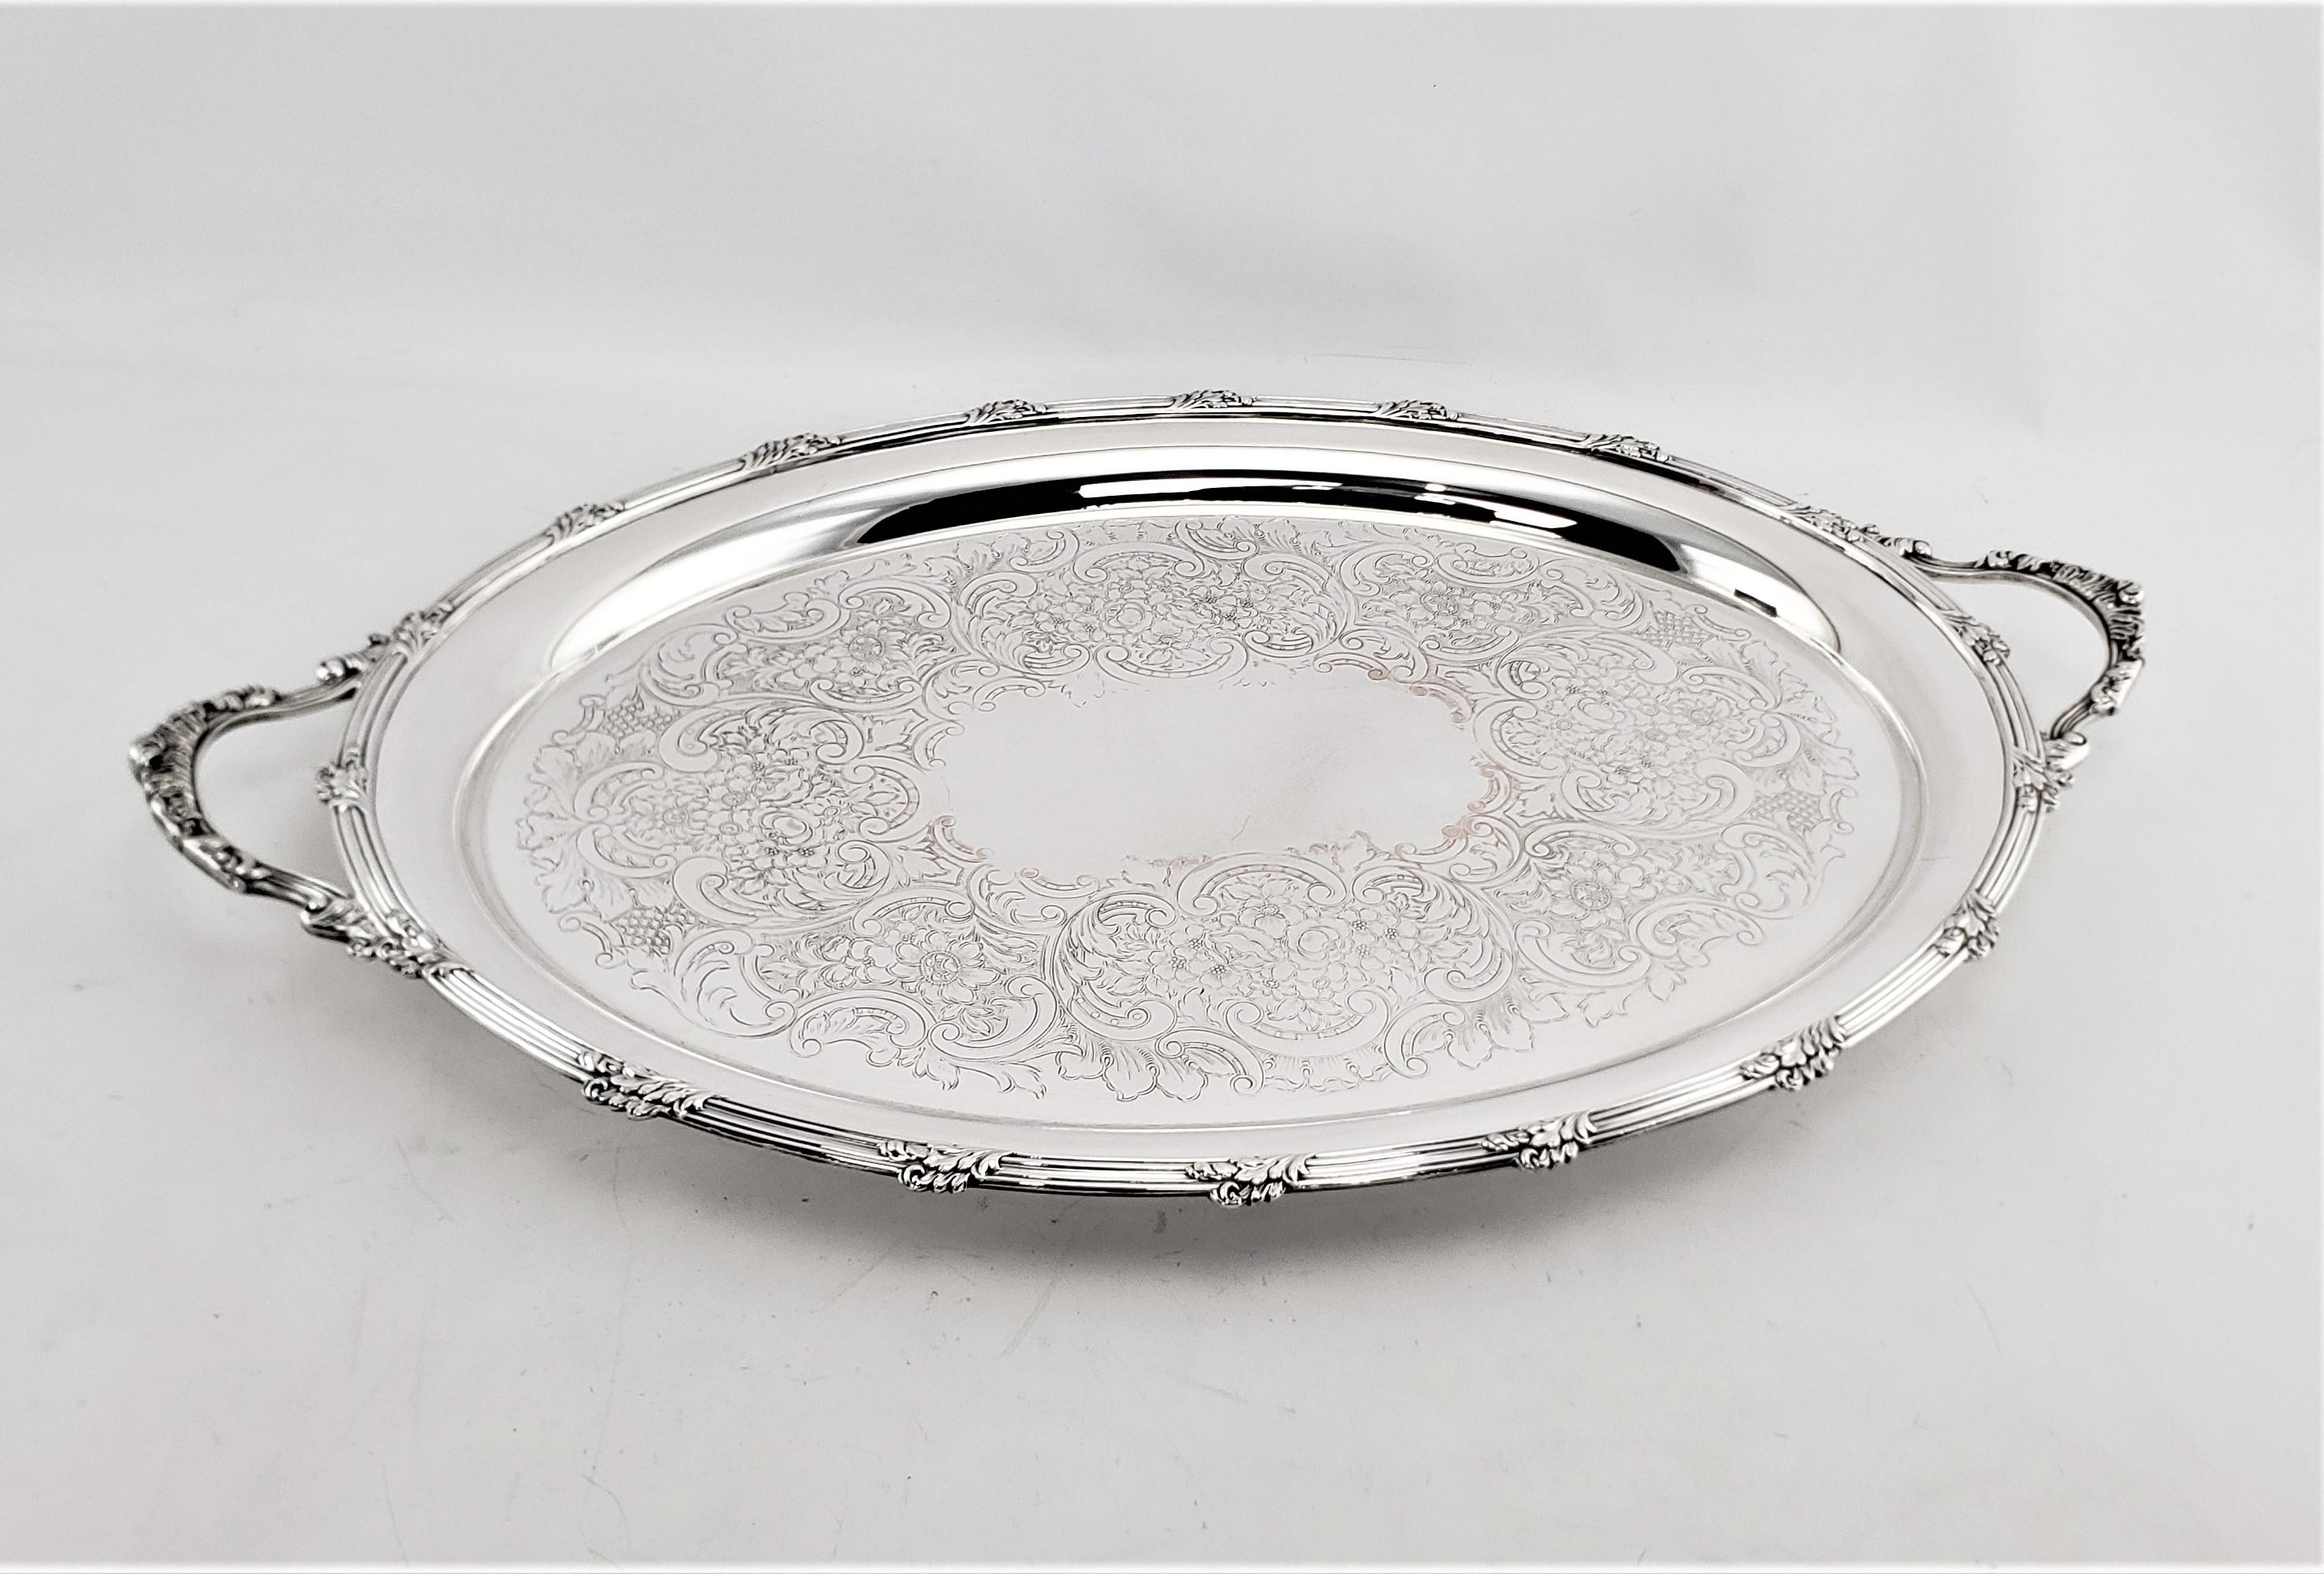 This very large oval silver plated serving tray was made by the renowned Barker-Ellis Silver Co. of England in approximately 1920 in an Edwardian style. The surface of the tray is ornately engraved with a scrolling floral motif, which is accented by